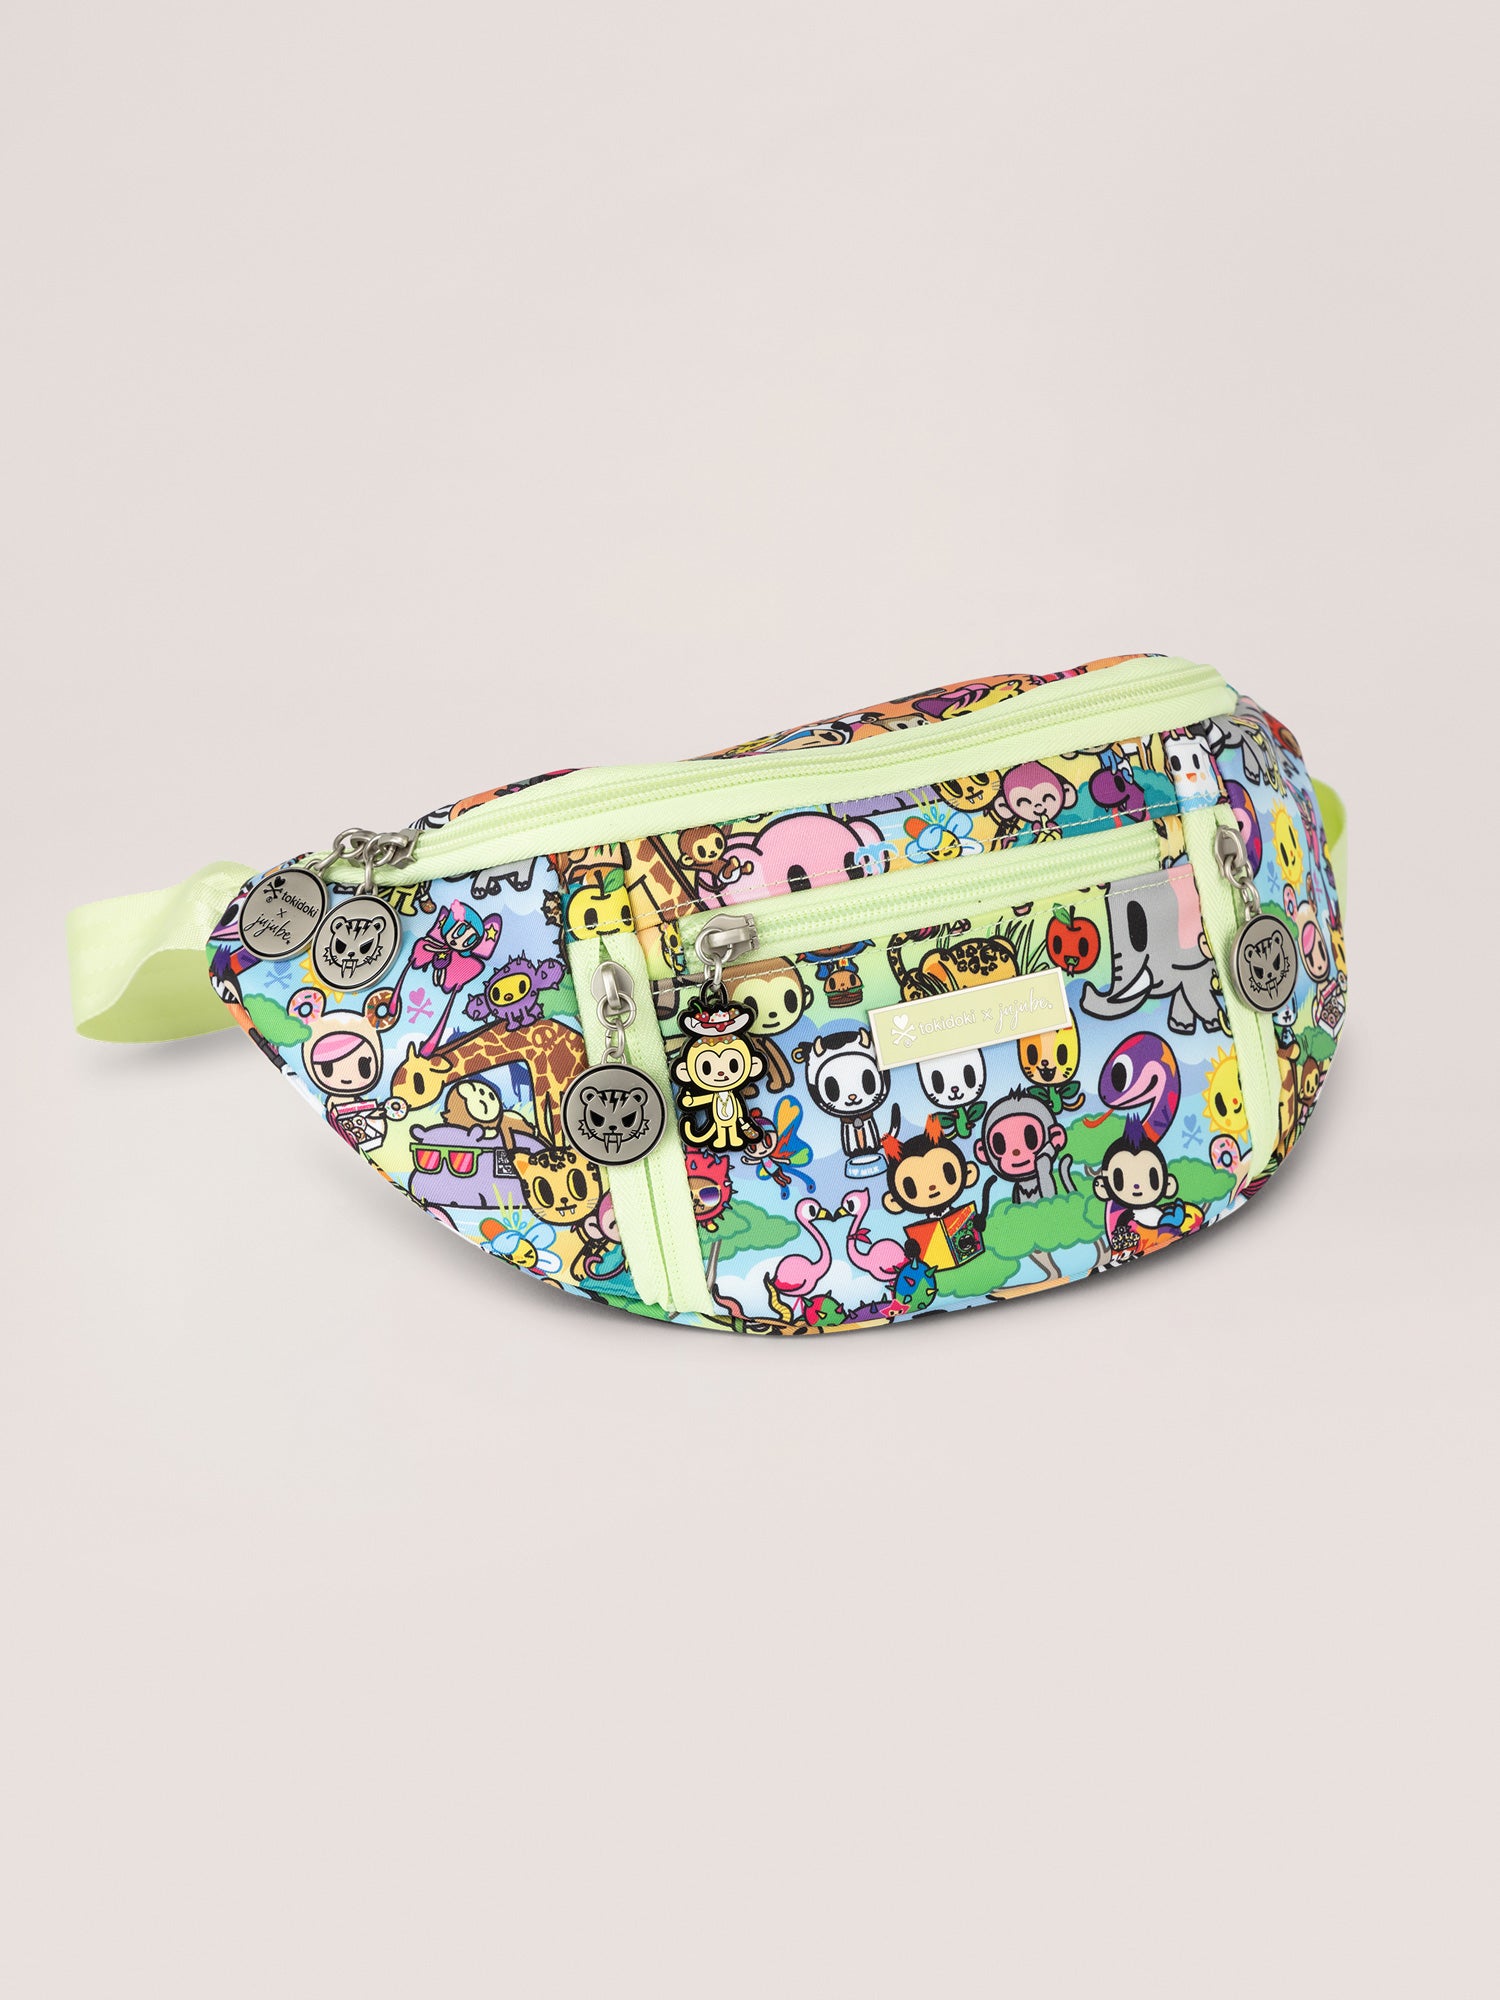 Ombre Blues, Greens and Oranges in the Background with tokidoki Characters in a Photo Safari Theme Sling Bag Crossbody Bag Quarter Angle View